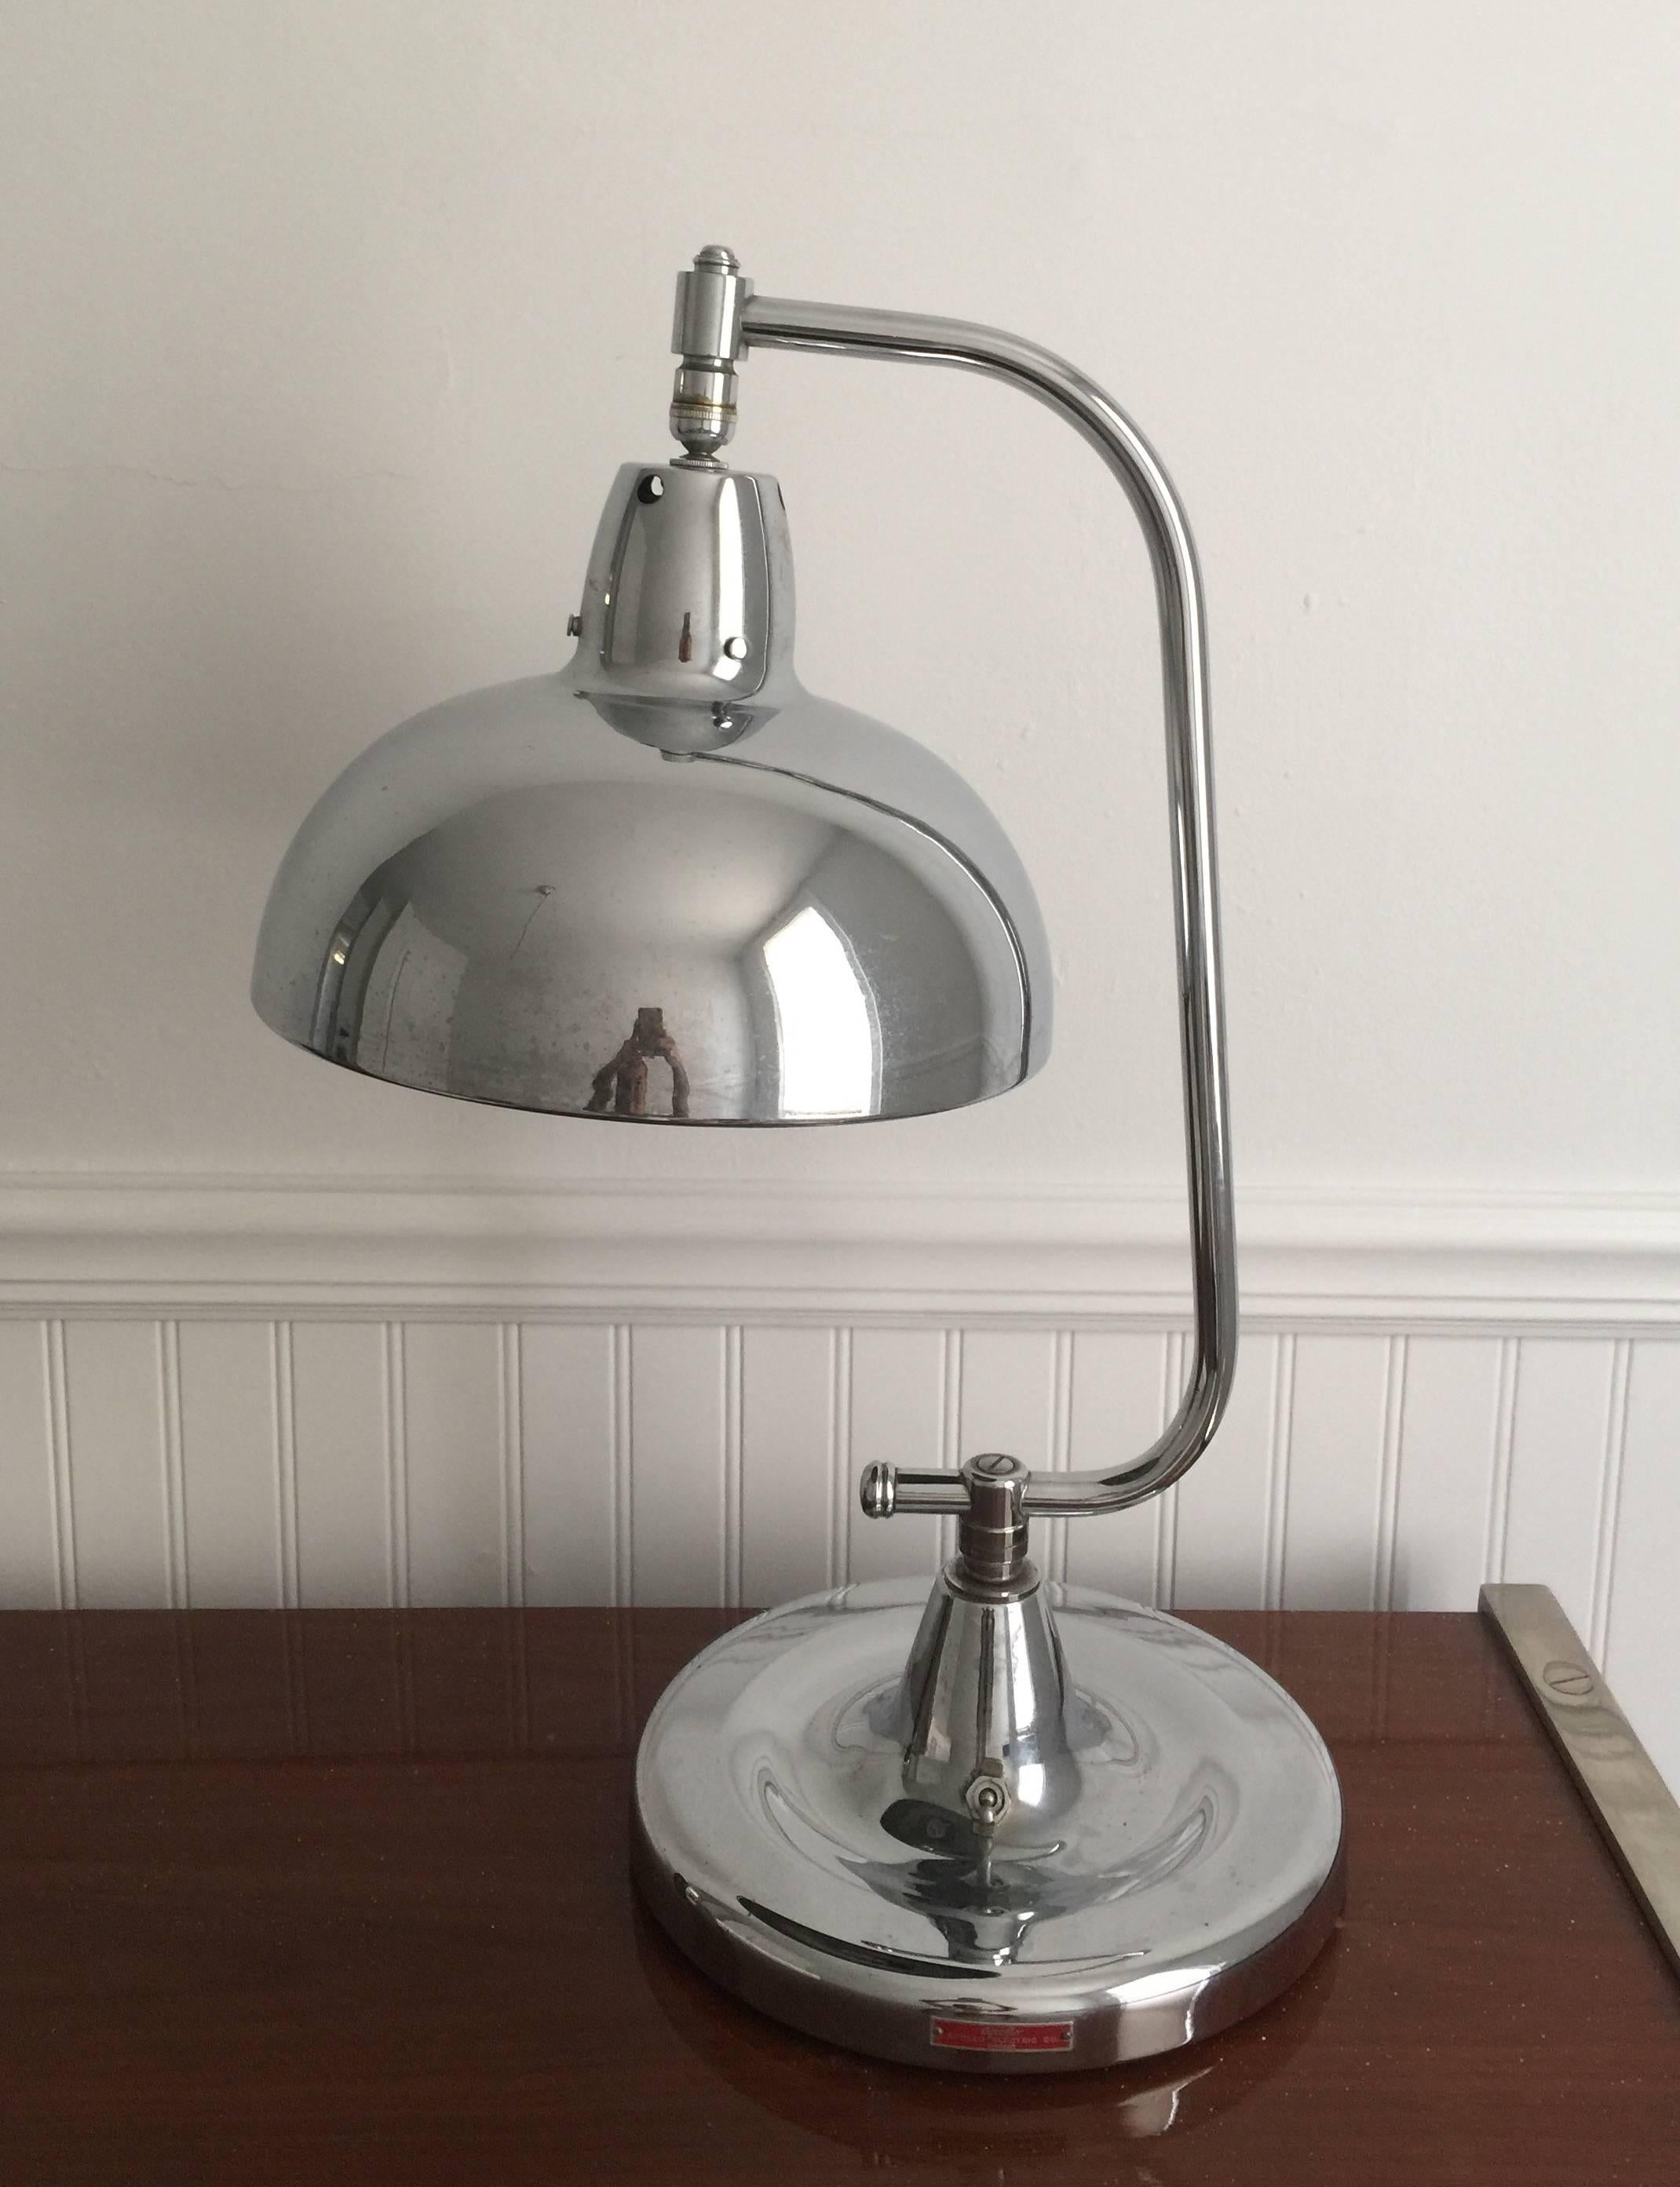 A polished chrome jeweler's lamp wth adjustable shade and pivoting base, USA, circa 1940. Signed.

Dimensions:
22 inch height
10.5 inch base.